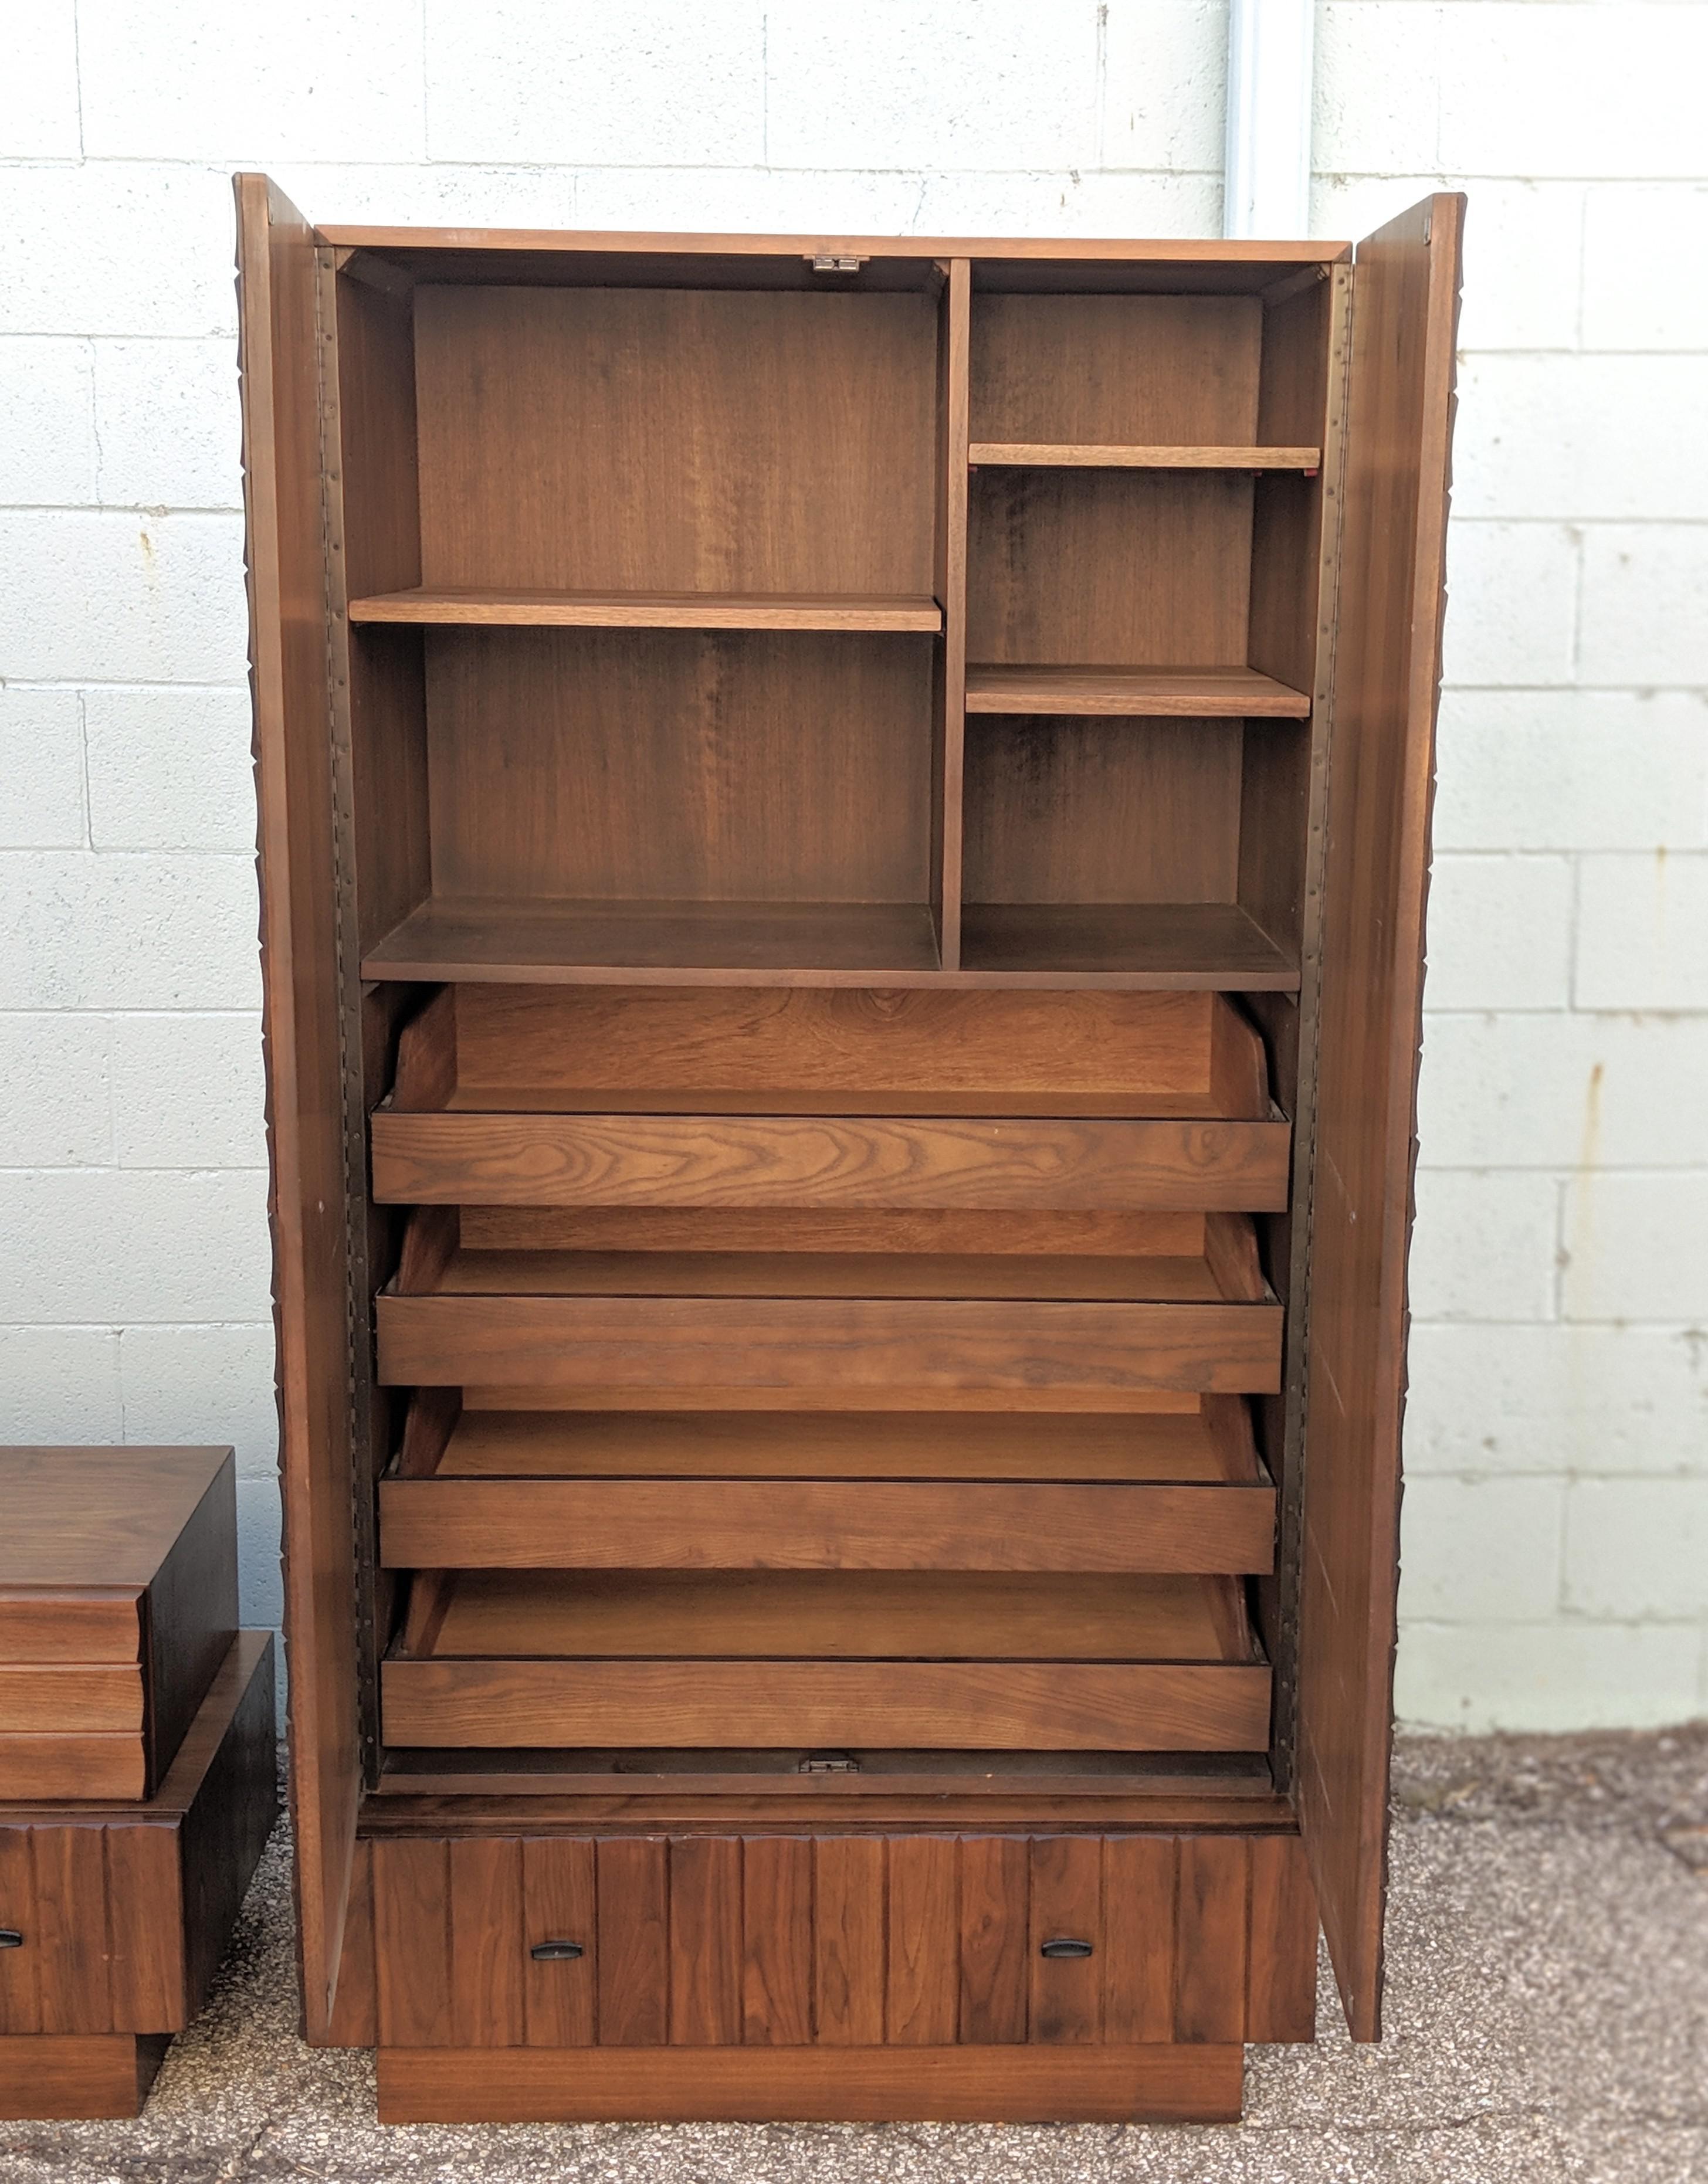 This is a really unique high boy dresser made out of wood and walnut veneer. It has a nice brick or block wood carver fronts. The drawers have rolling support making it sturdy and easy to use. This would look beautiful in any home!